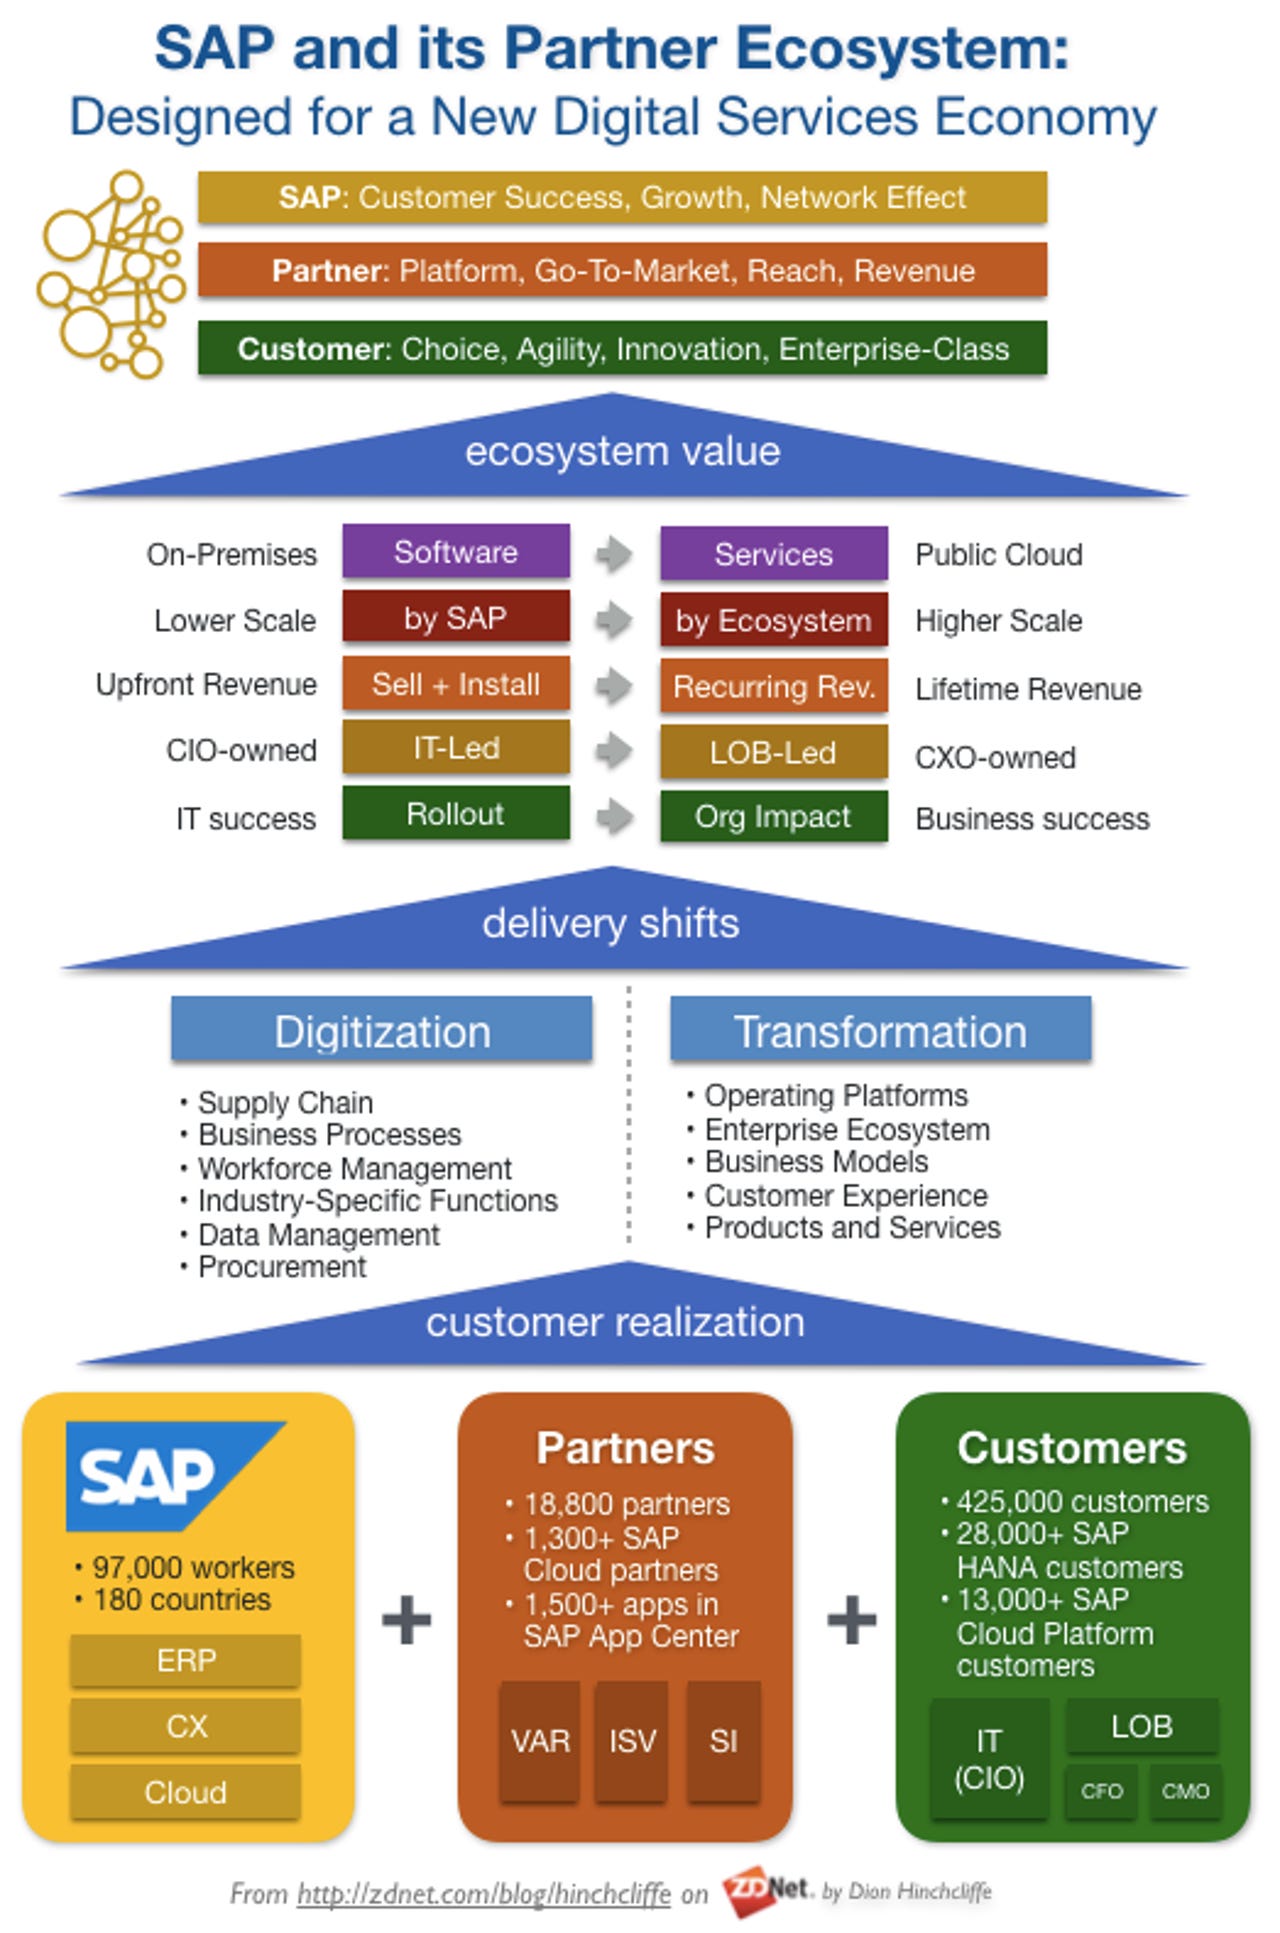 The SAP Partner Ecosystem as of 2019